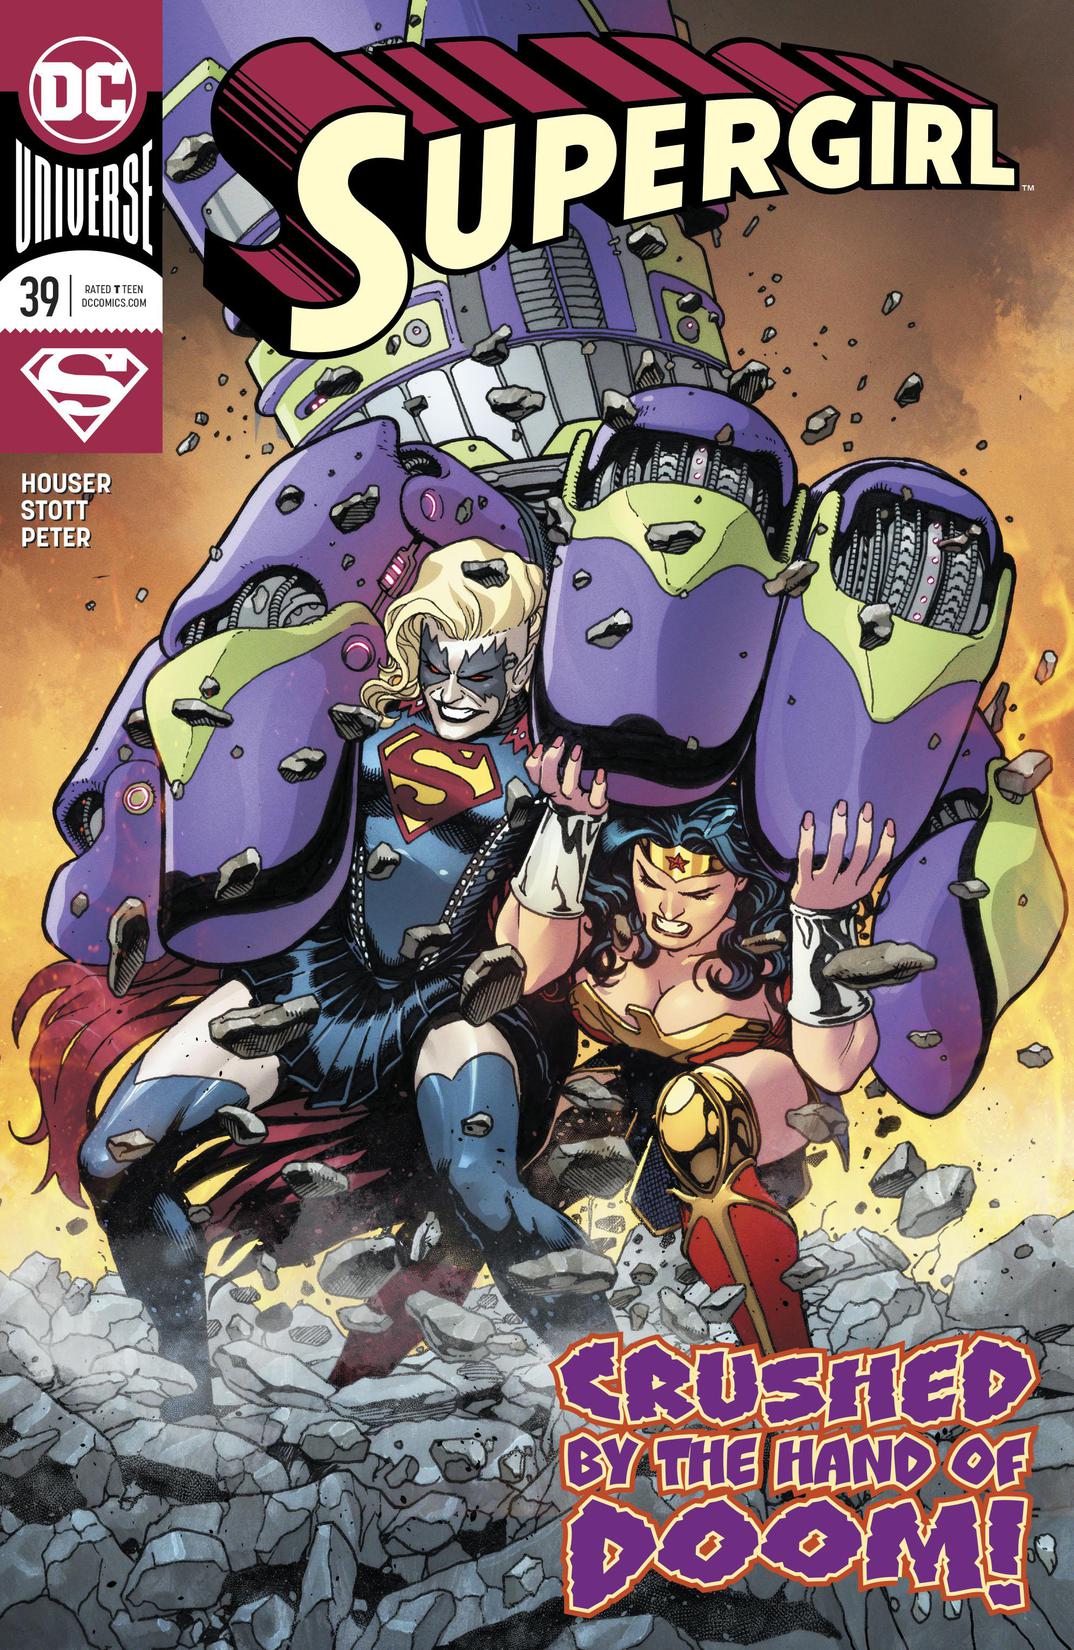 Supergirl (2016-) #39 preview images